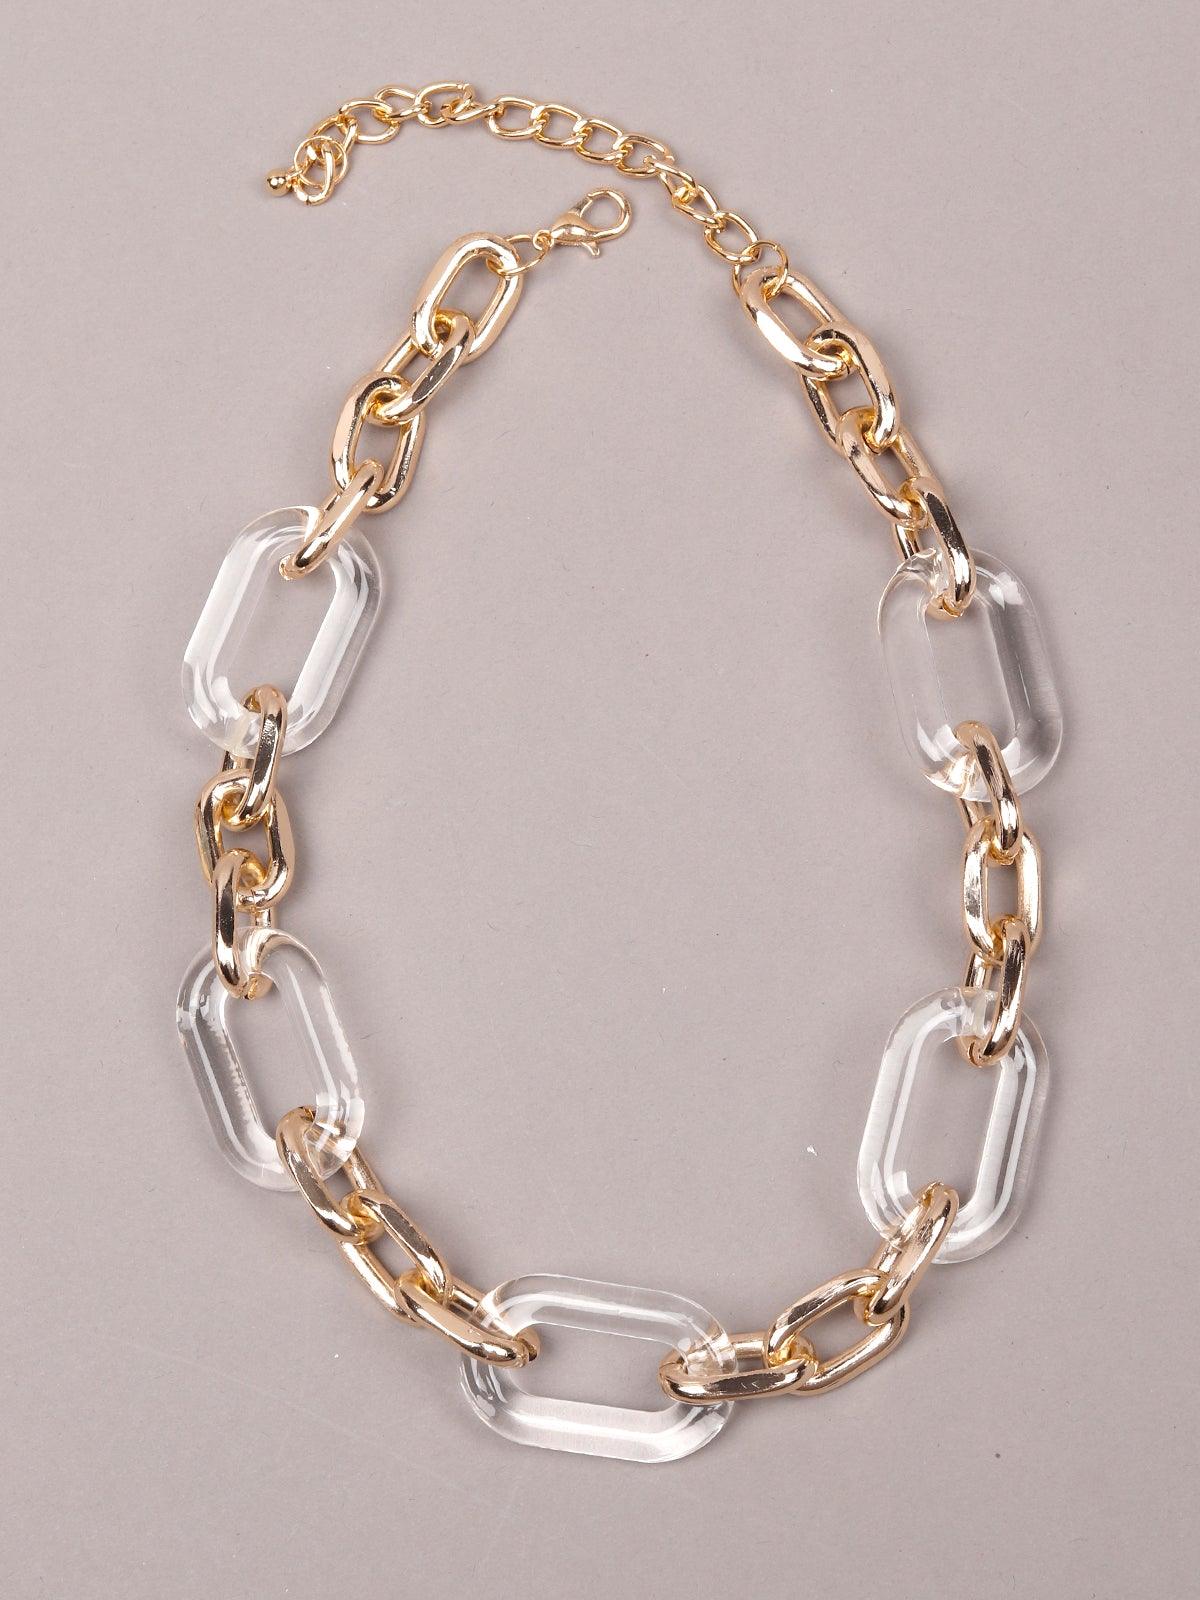 Transparent And Gold-Tone Interlinked Chained Necklace - Odette